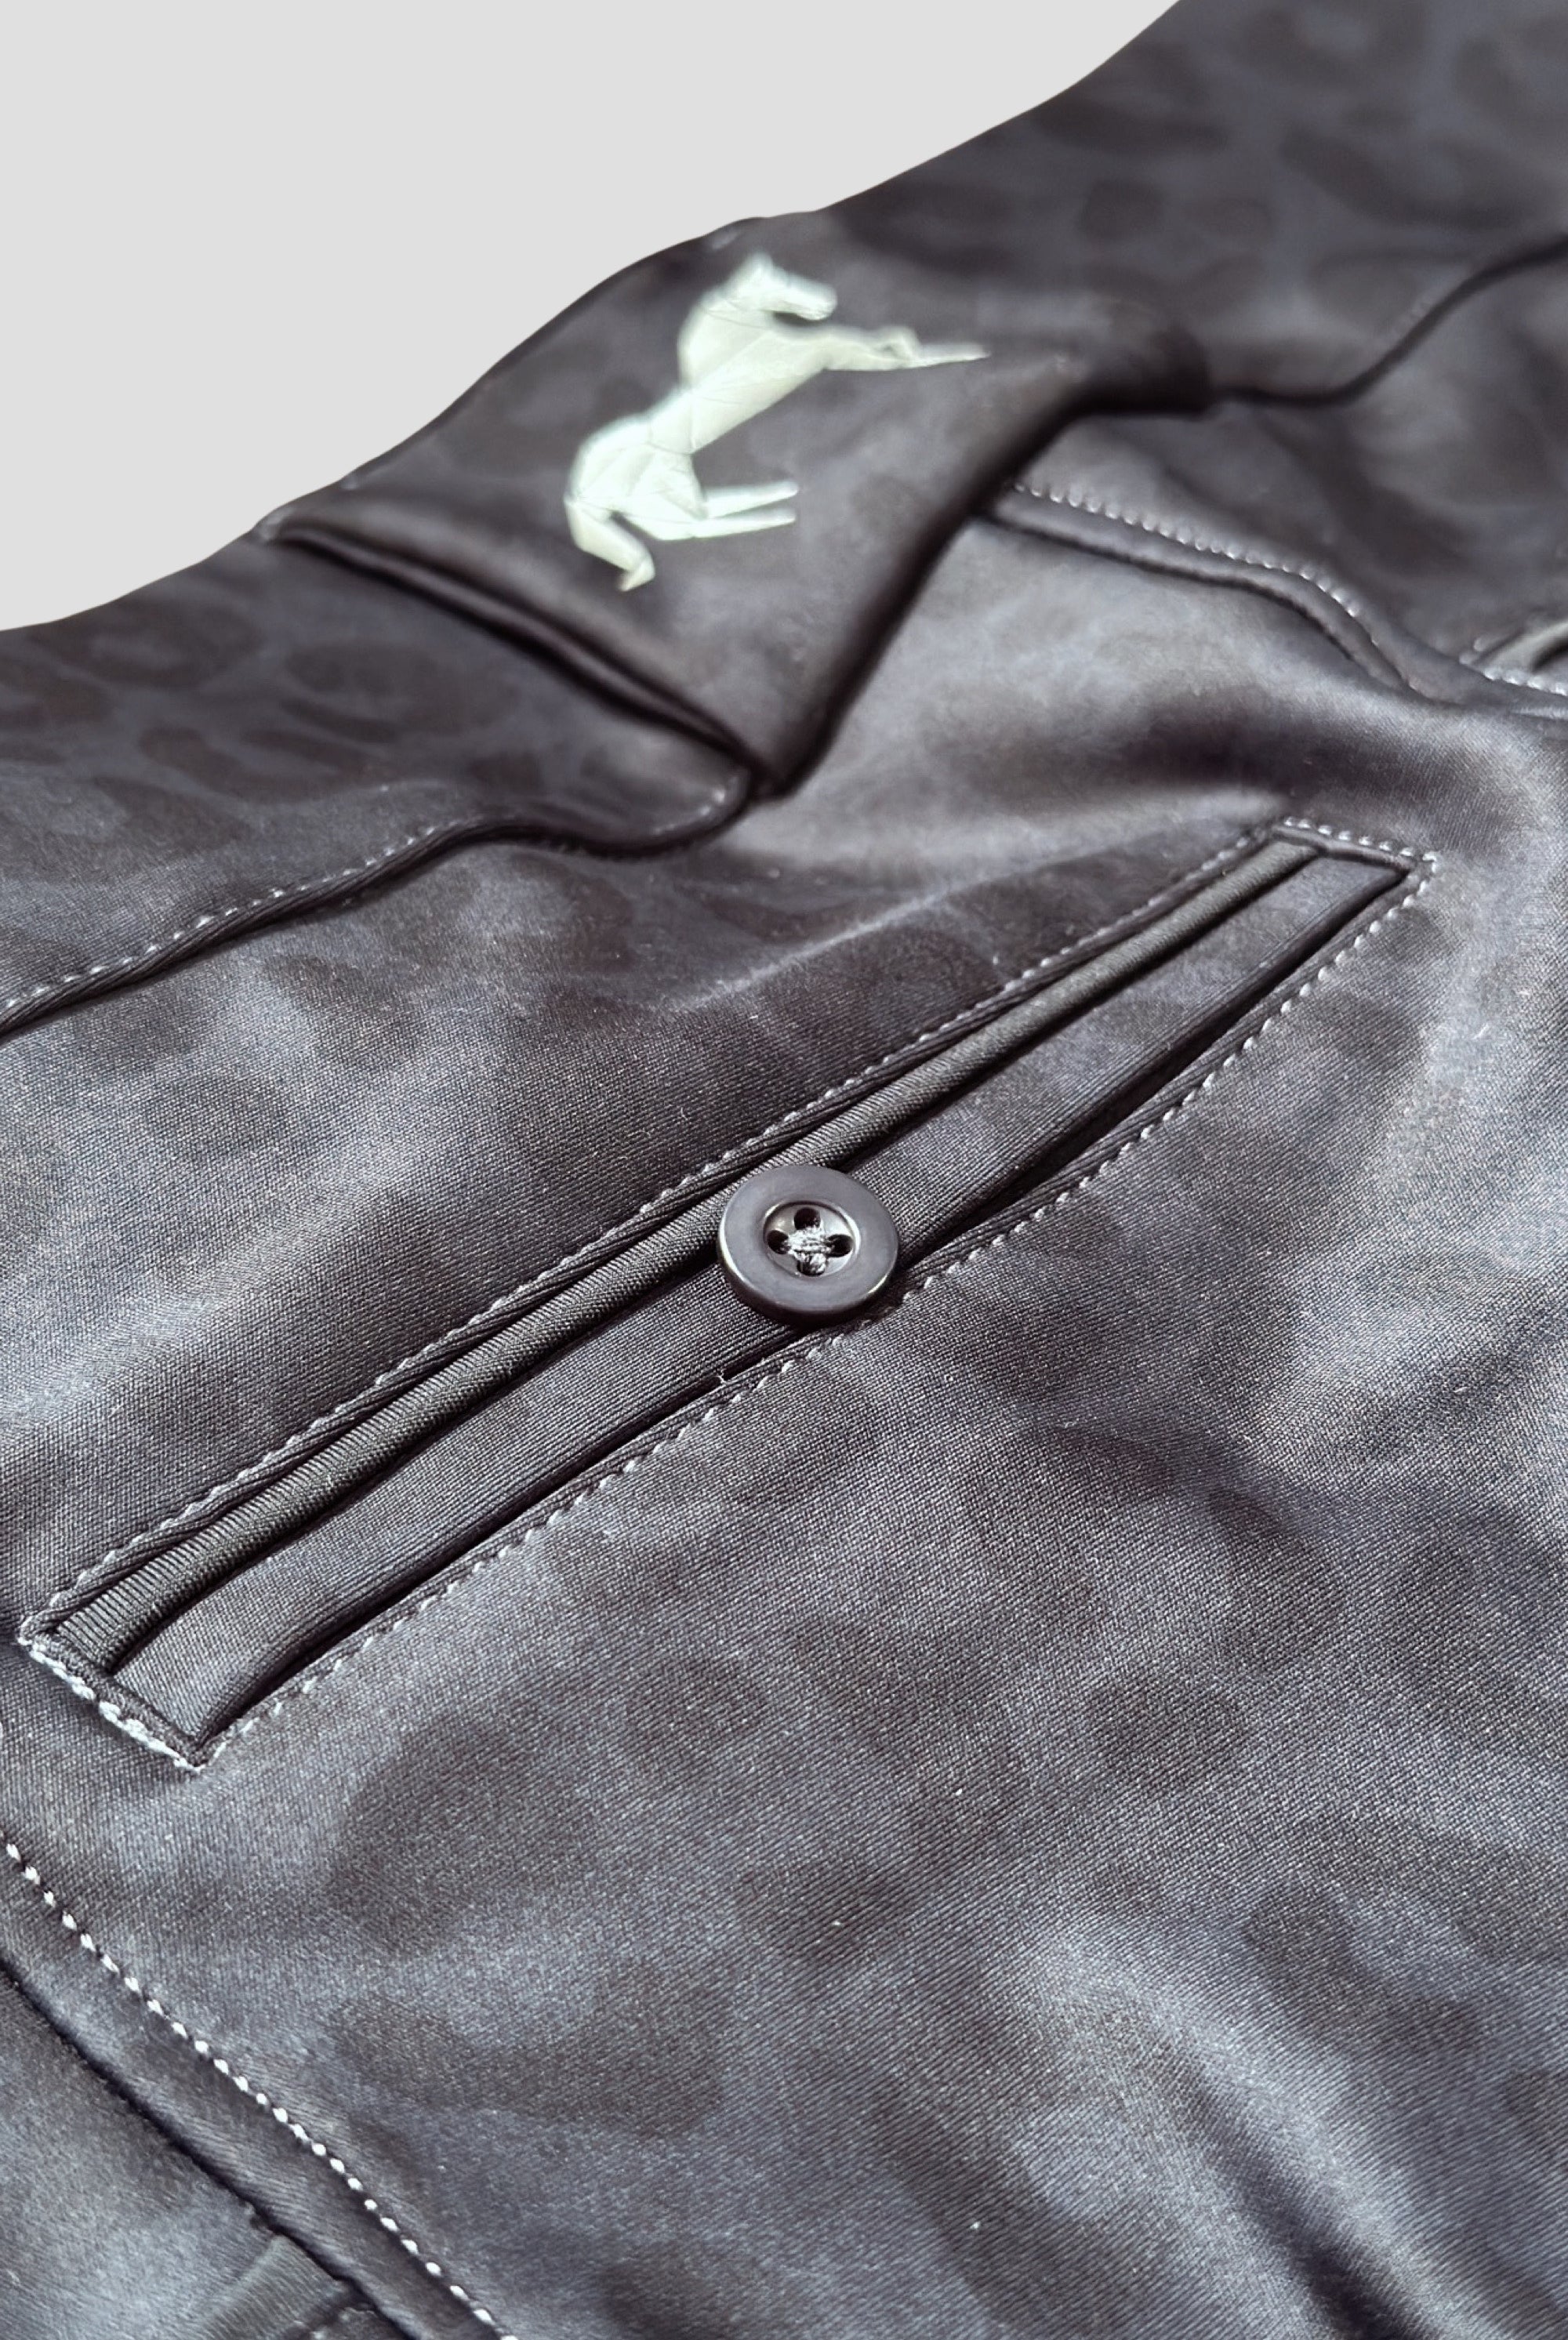 Close-up of dark gray Pure Canter The Breeches - Black Leopard with a subtle leopard print pattern. The image shows a buttoned back pocket, detailed stitching, and an embroidered white logo featuring a horse and rider. Made from performance fabric with a Silicone Seat for added grip, the texture and design details are clearly visible.